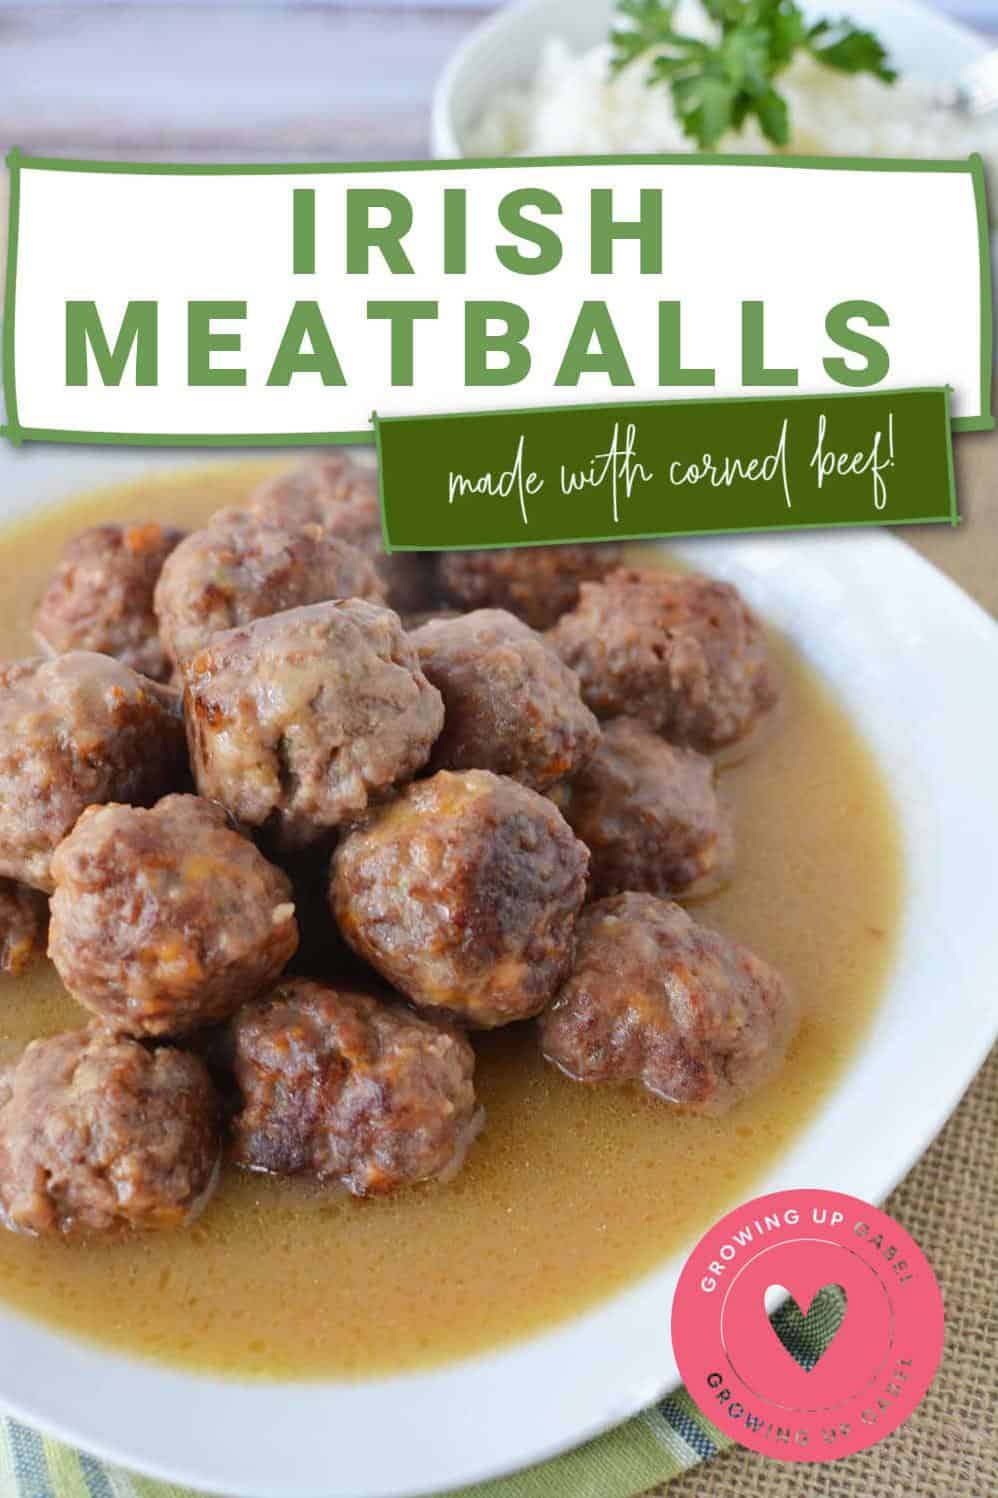  These meatballs are the ultimate comfort food - packed with flavor and hearty ingredients.